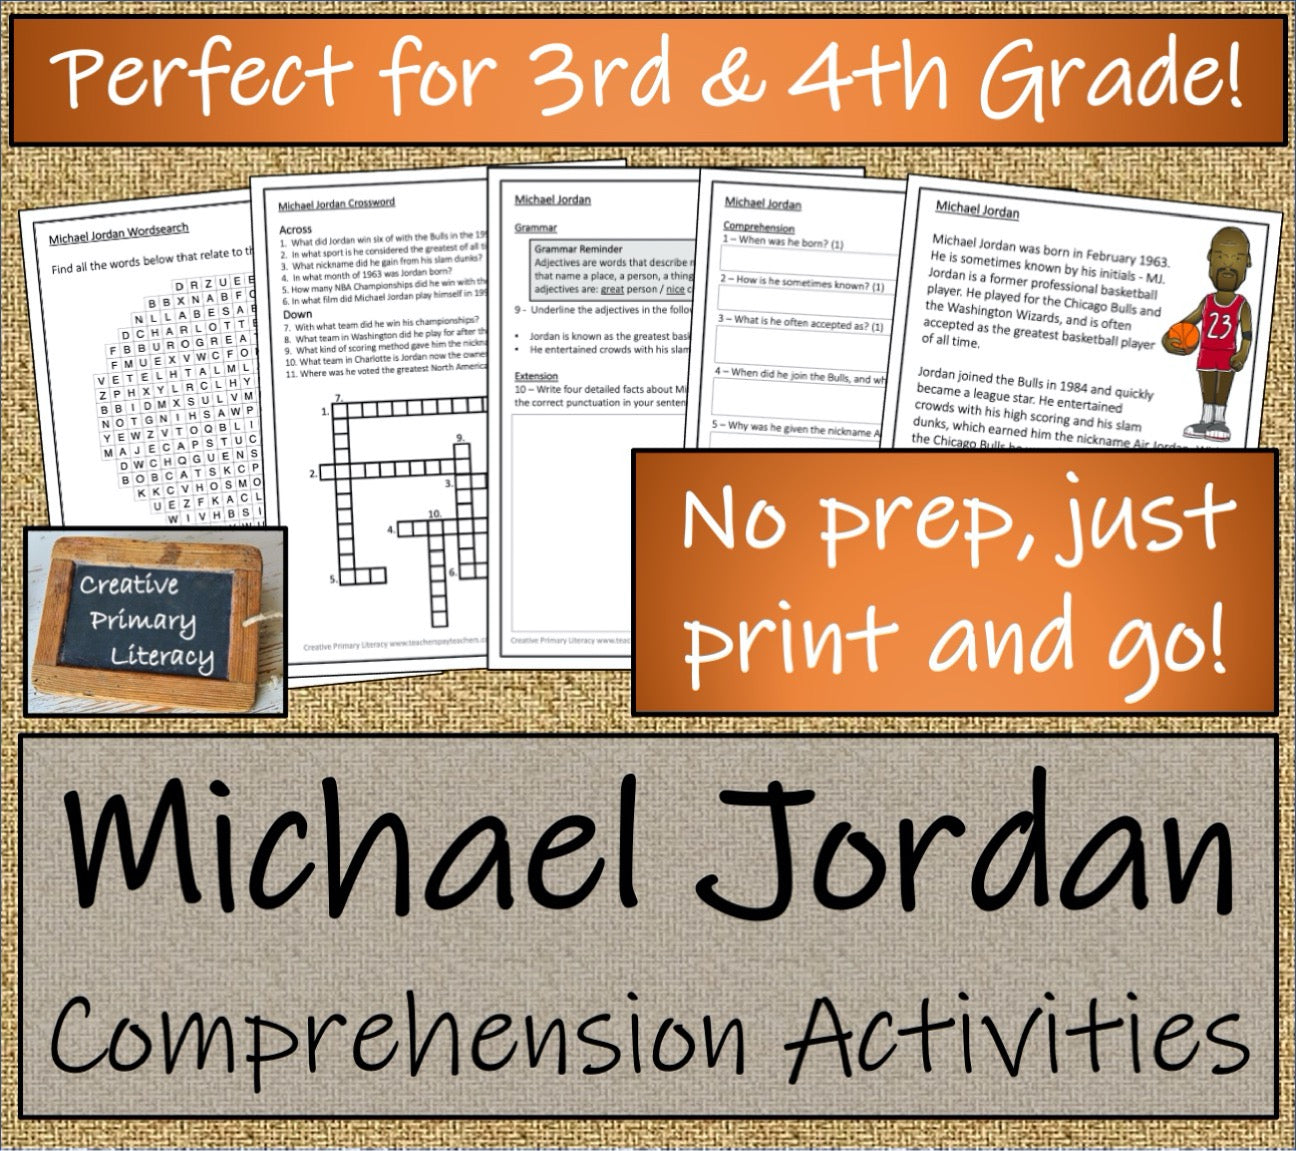 Basketball Players Close Reading Comprehension Activity Bundle | 3rd & 4th Grade